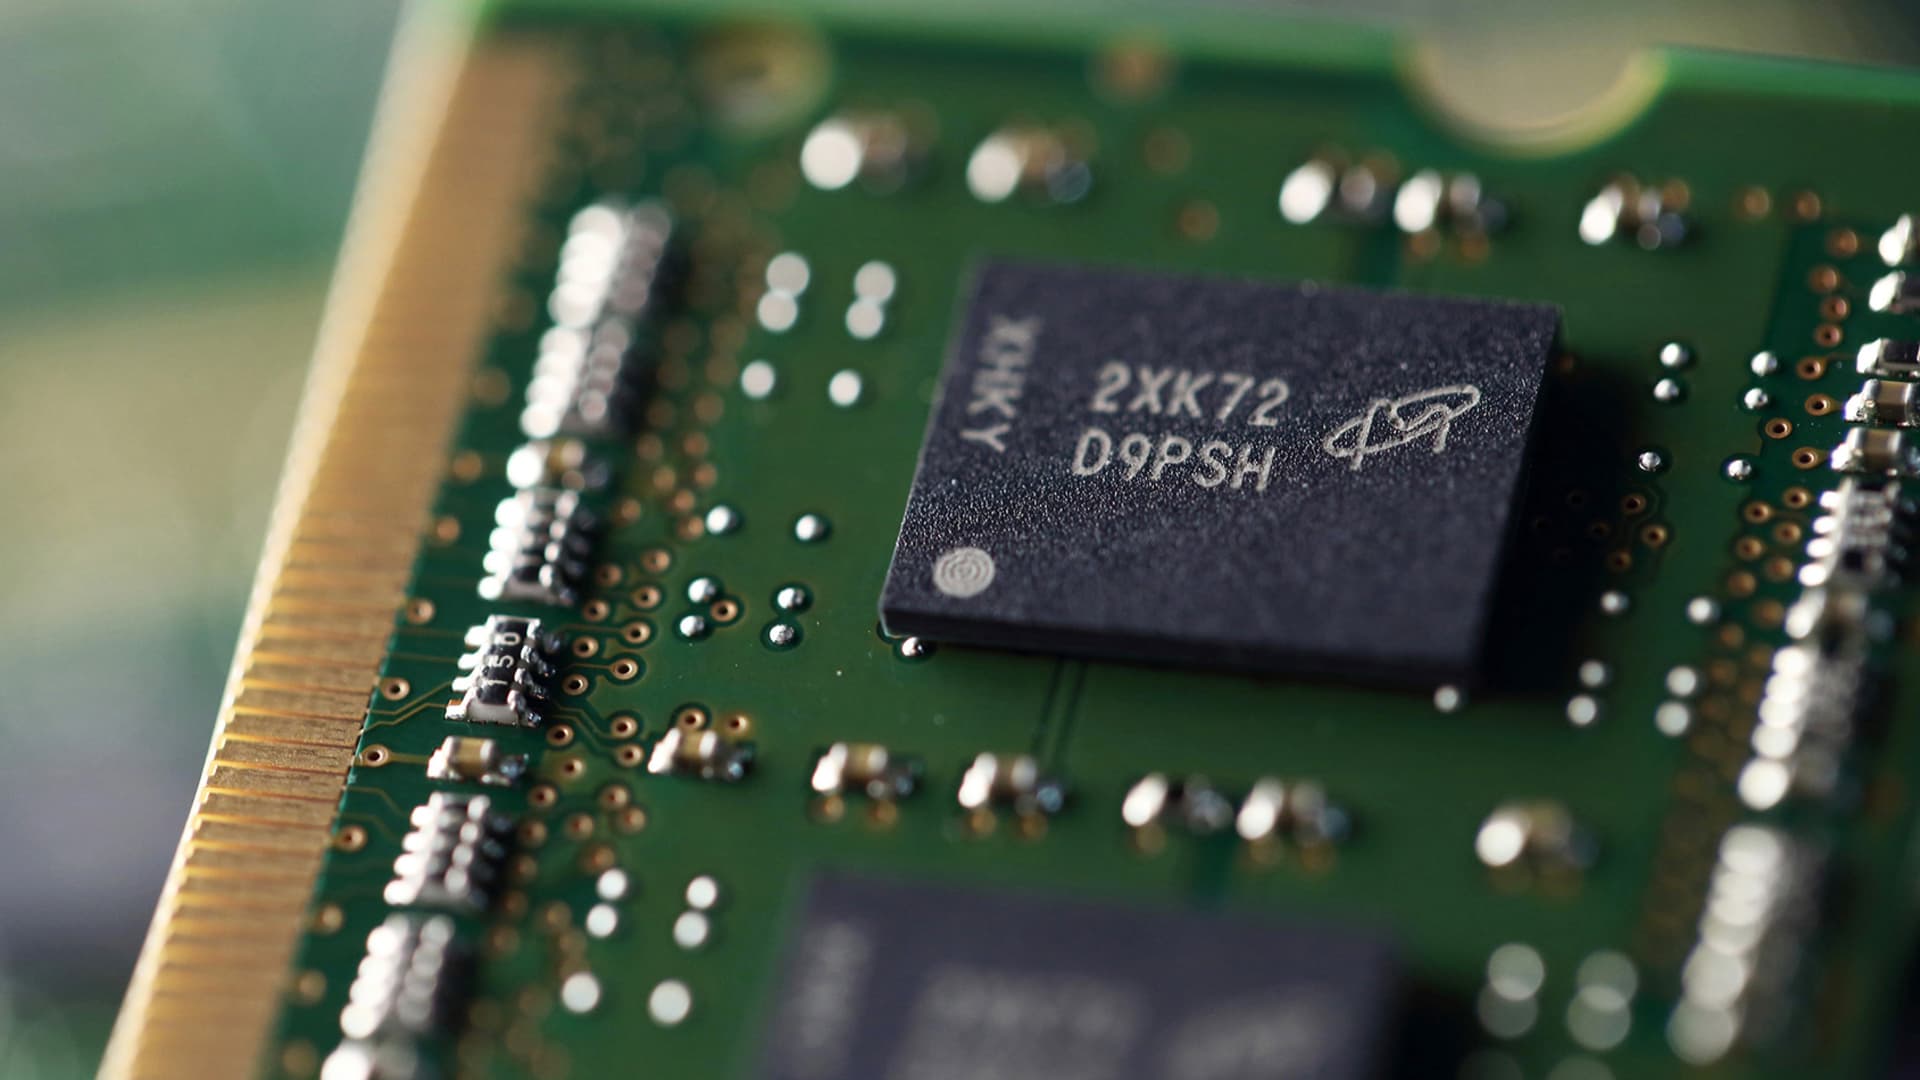 China chip stocks rally after Beijing said U.S. chip giant Micron is ‘major security risk’